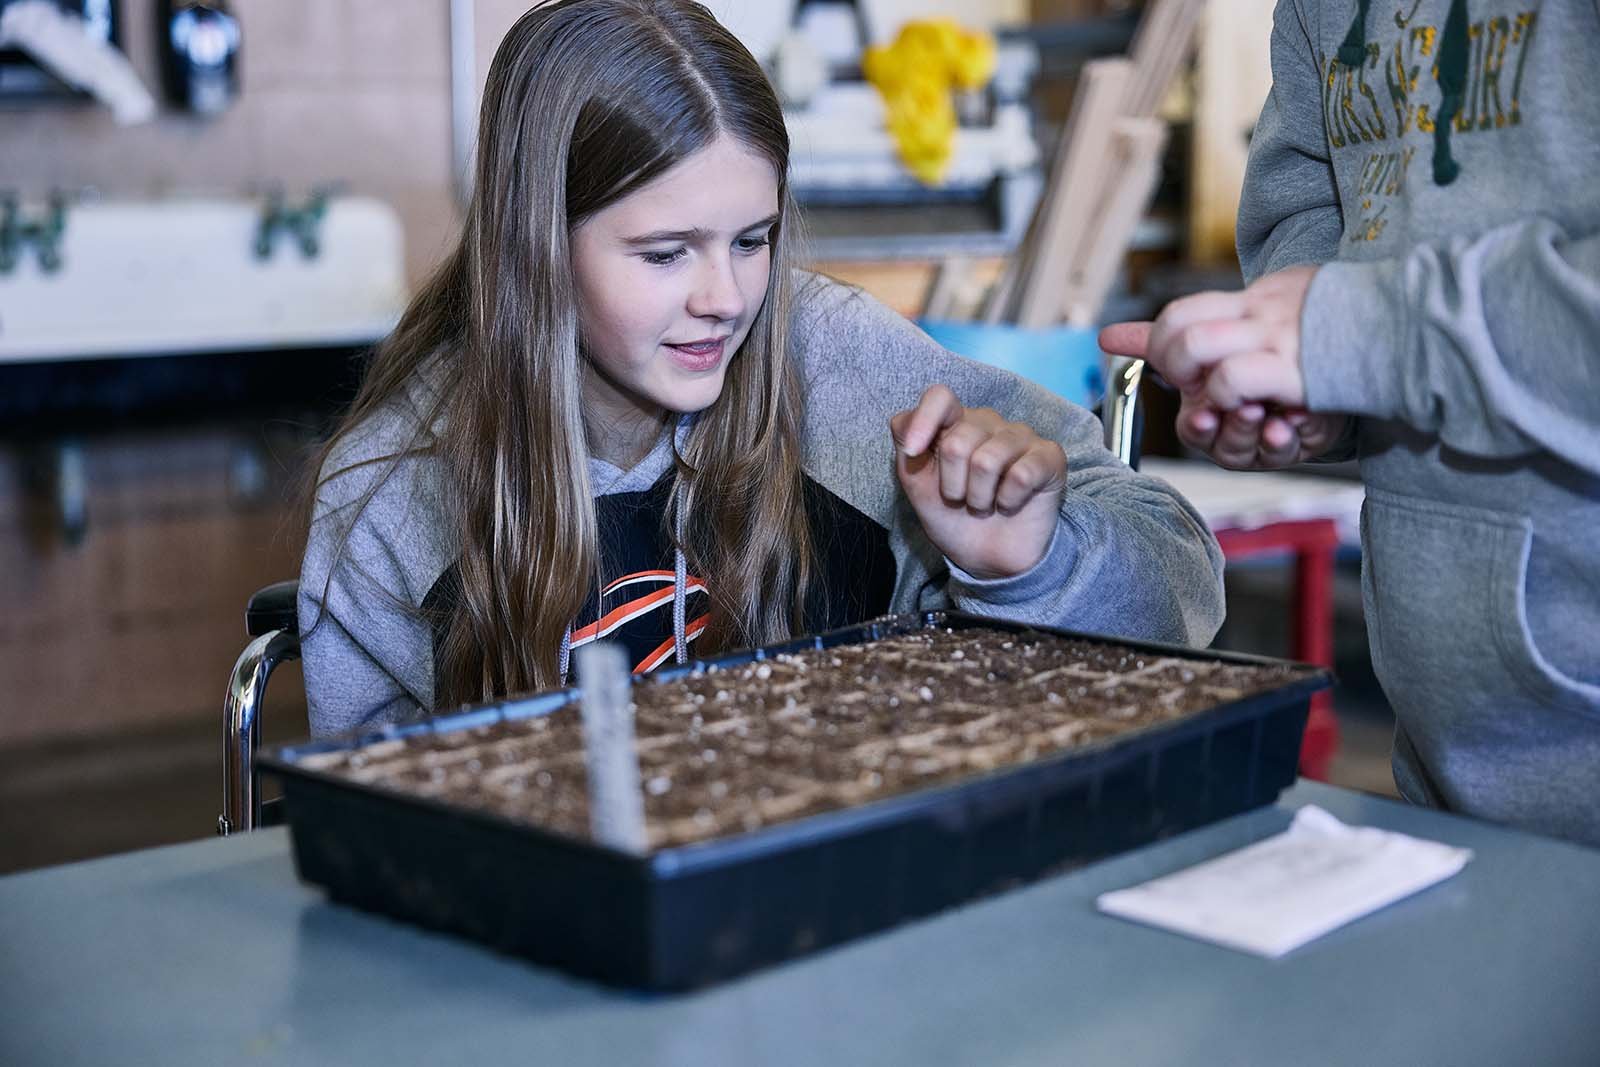  A sixth-grade student gets a hands-on lesson about seed starting during an agriculture class. 